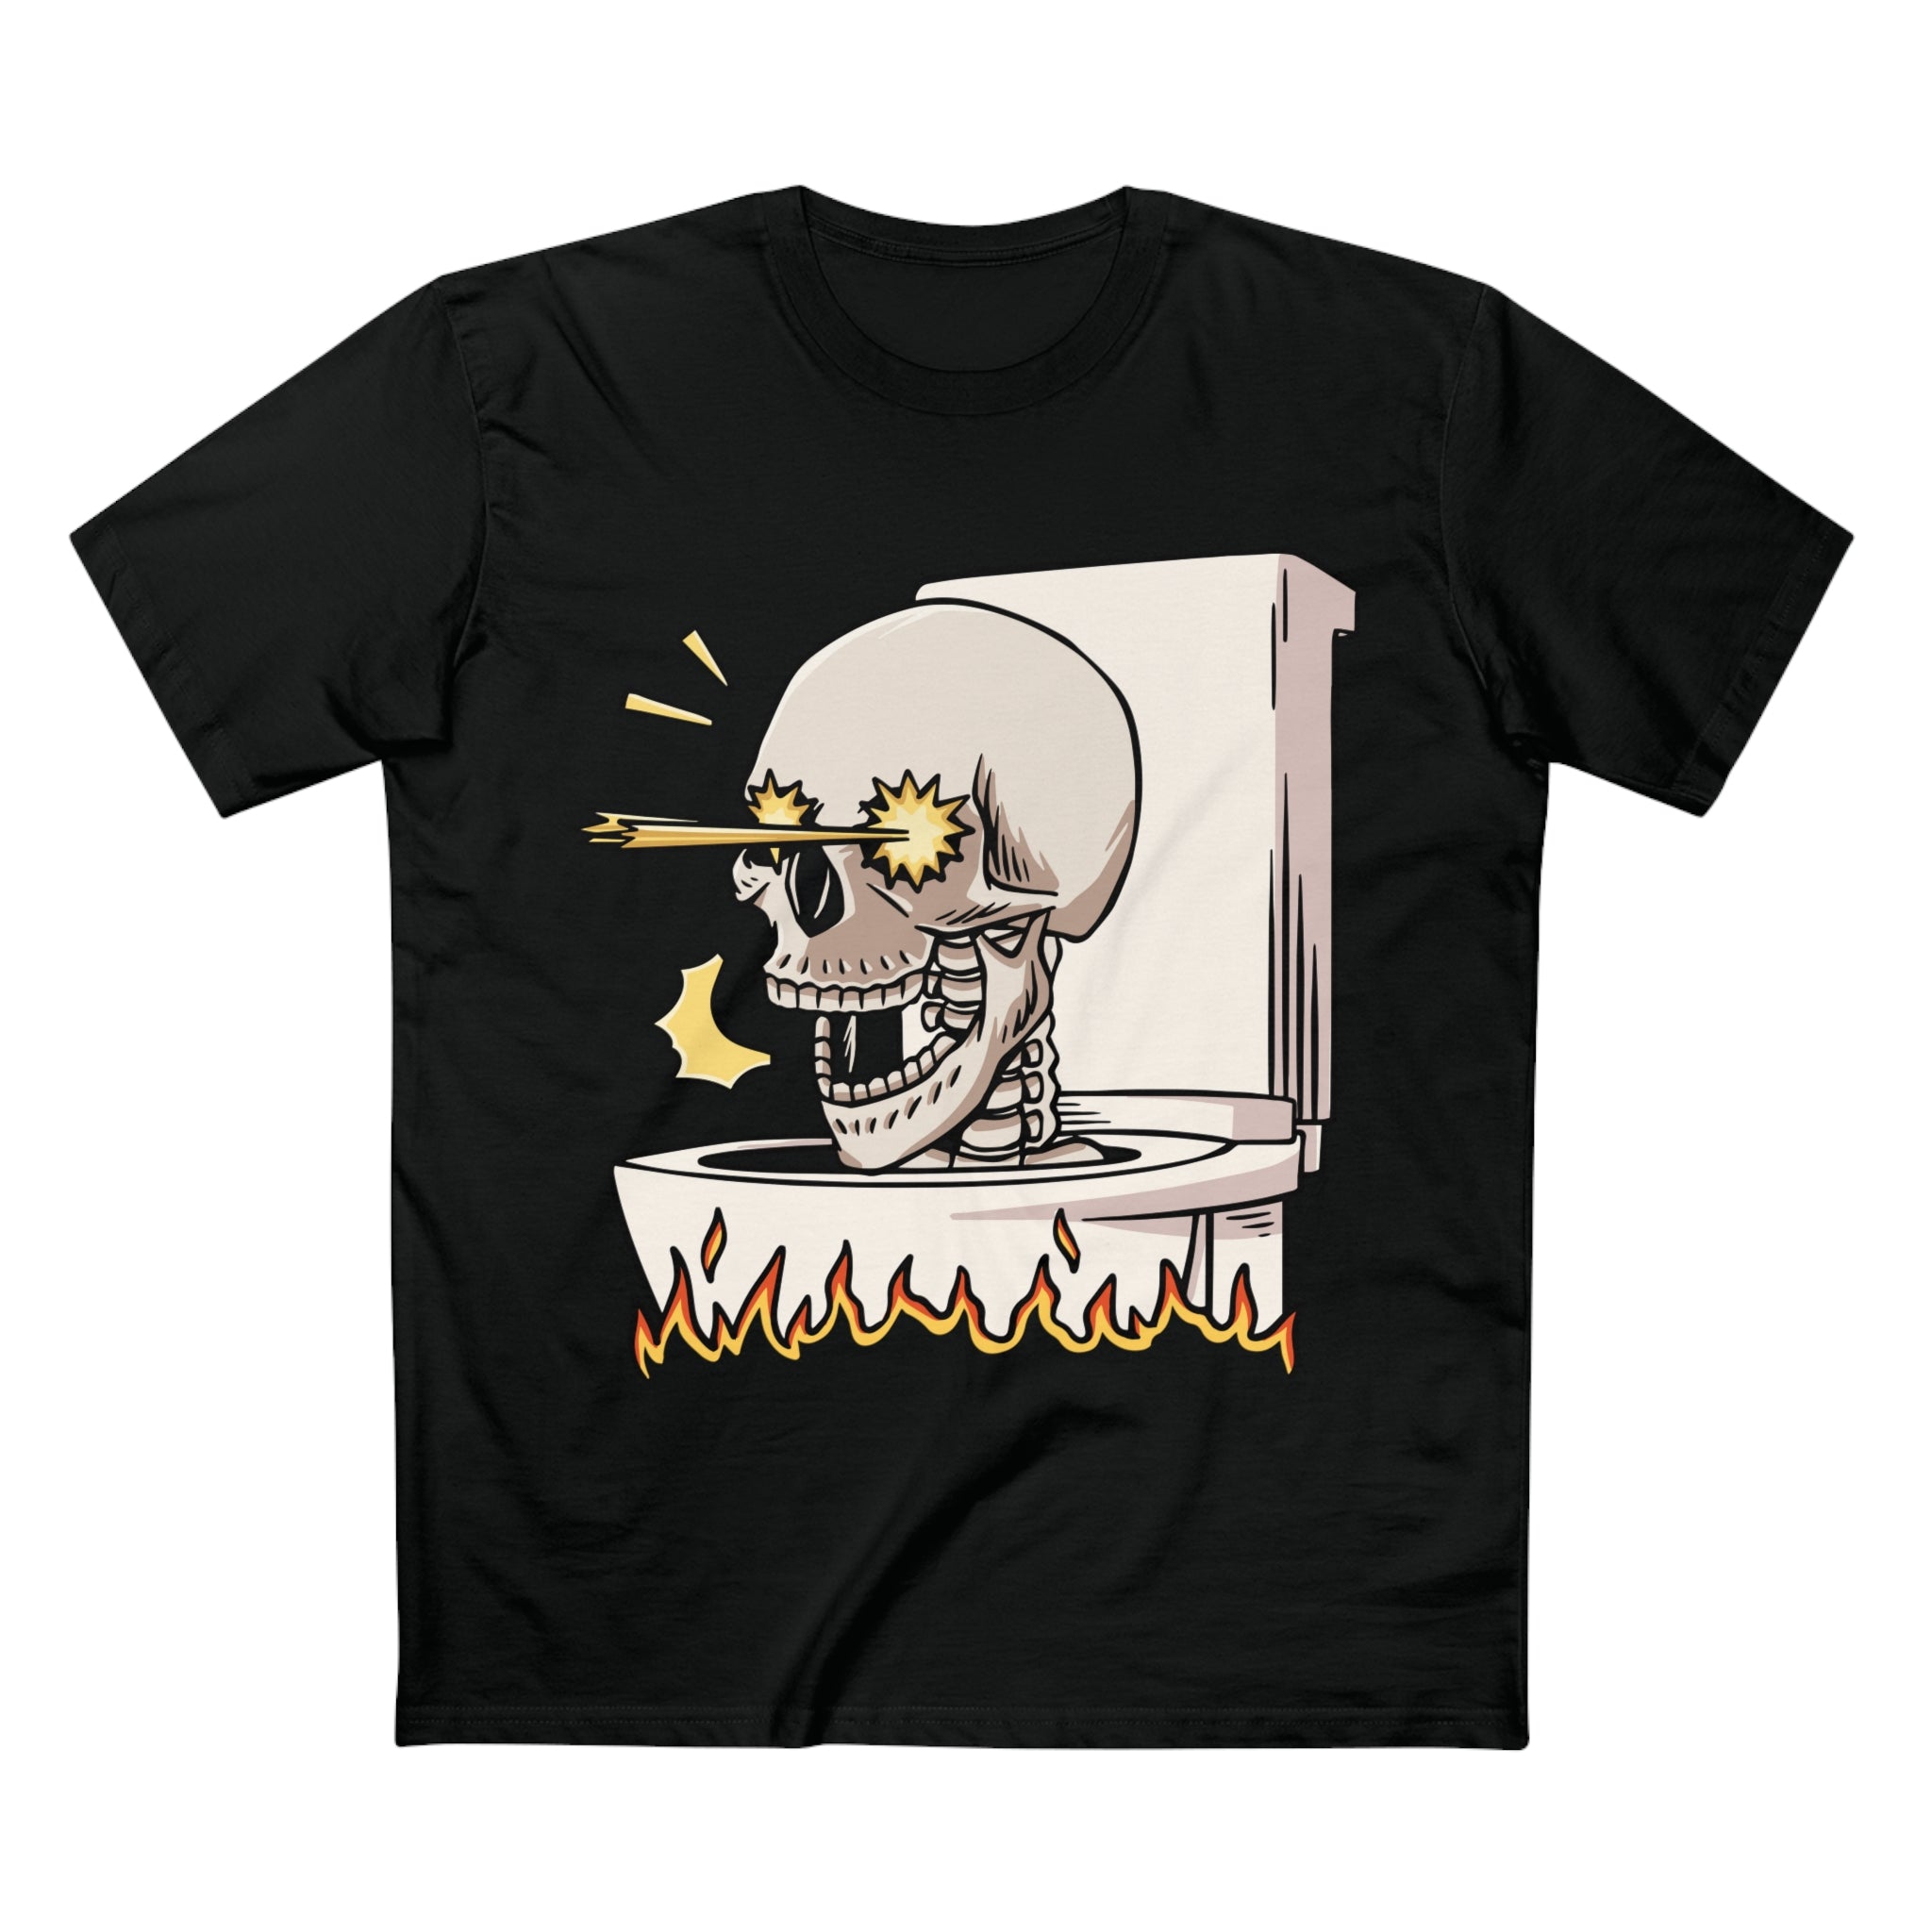 Black tee with fiery Skibidi toilet and laser-eyed skull graphic